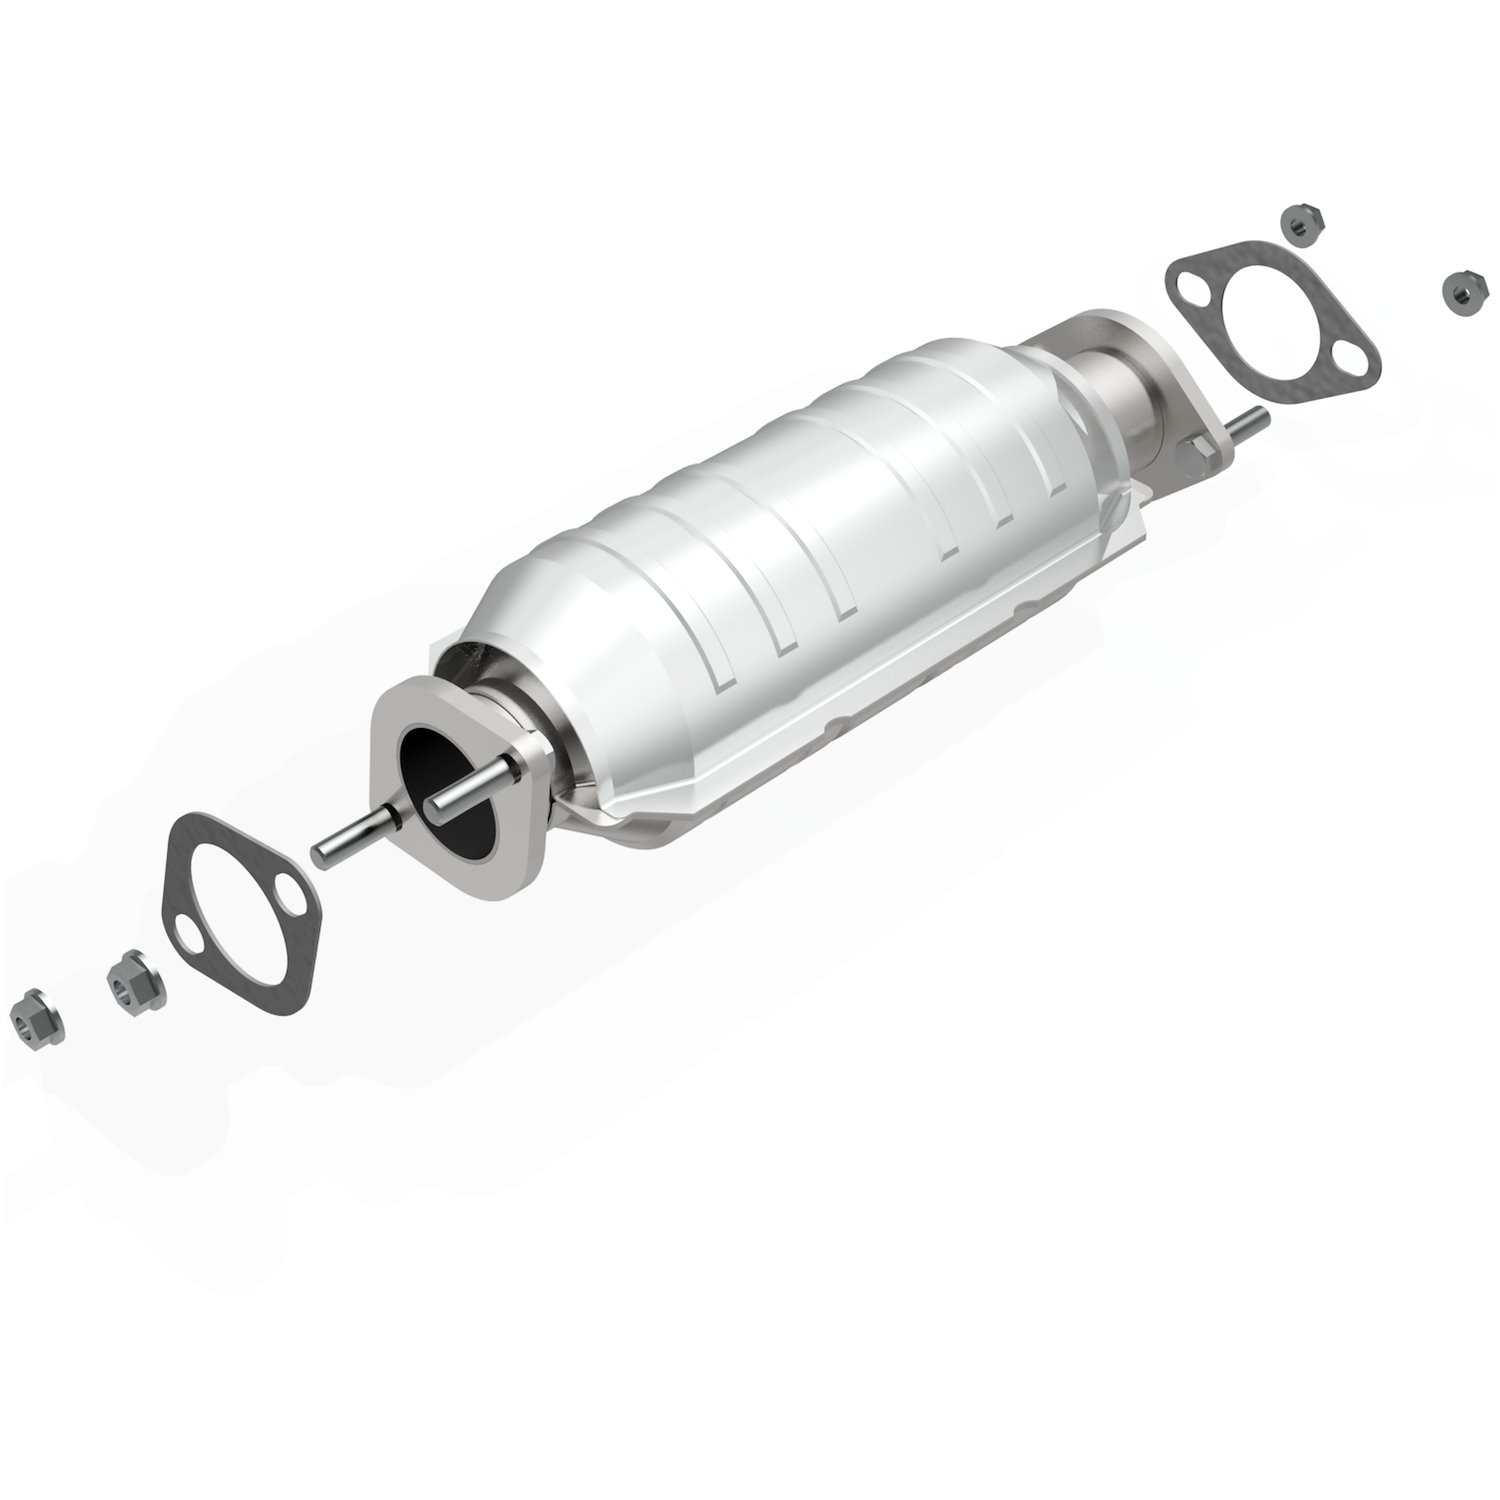 OEM Grade Federal / EPA Compliant Direct-Fit Catalytic Converter 49653